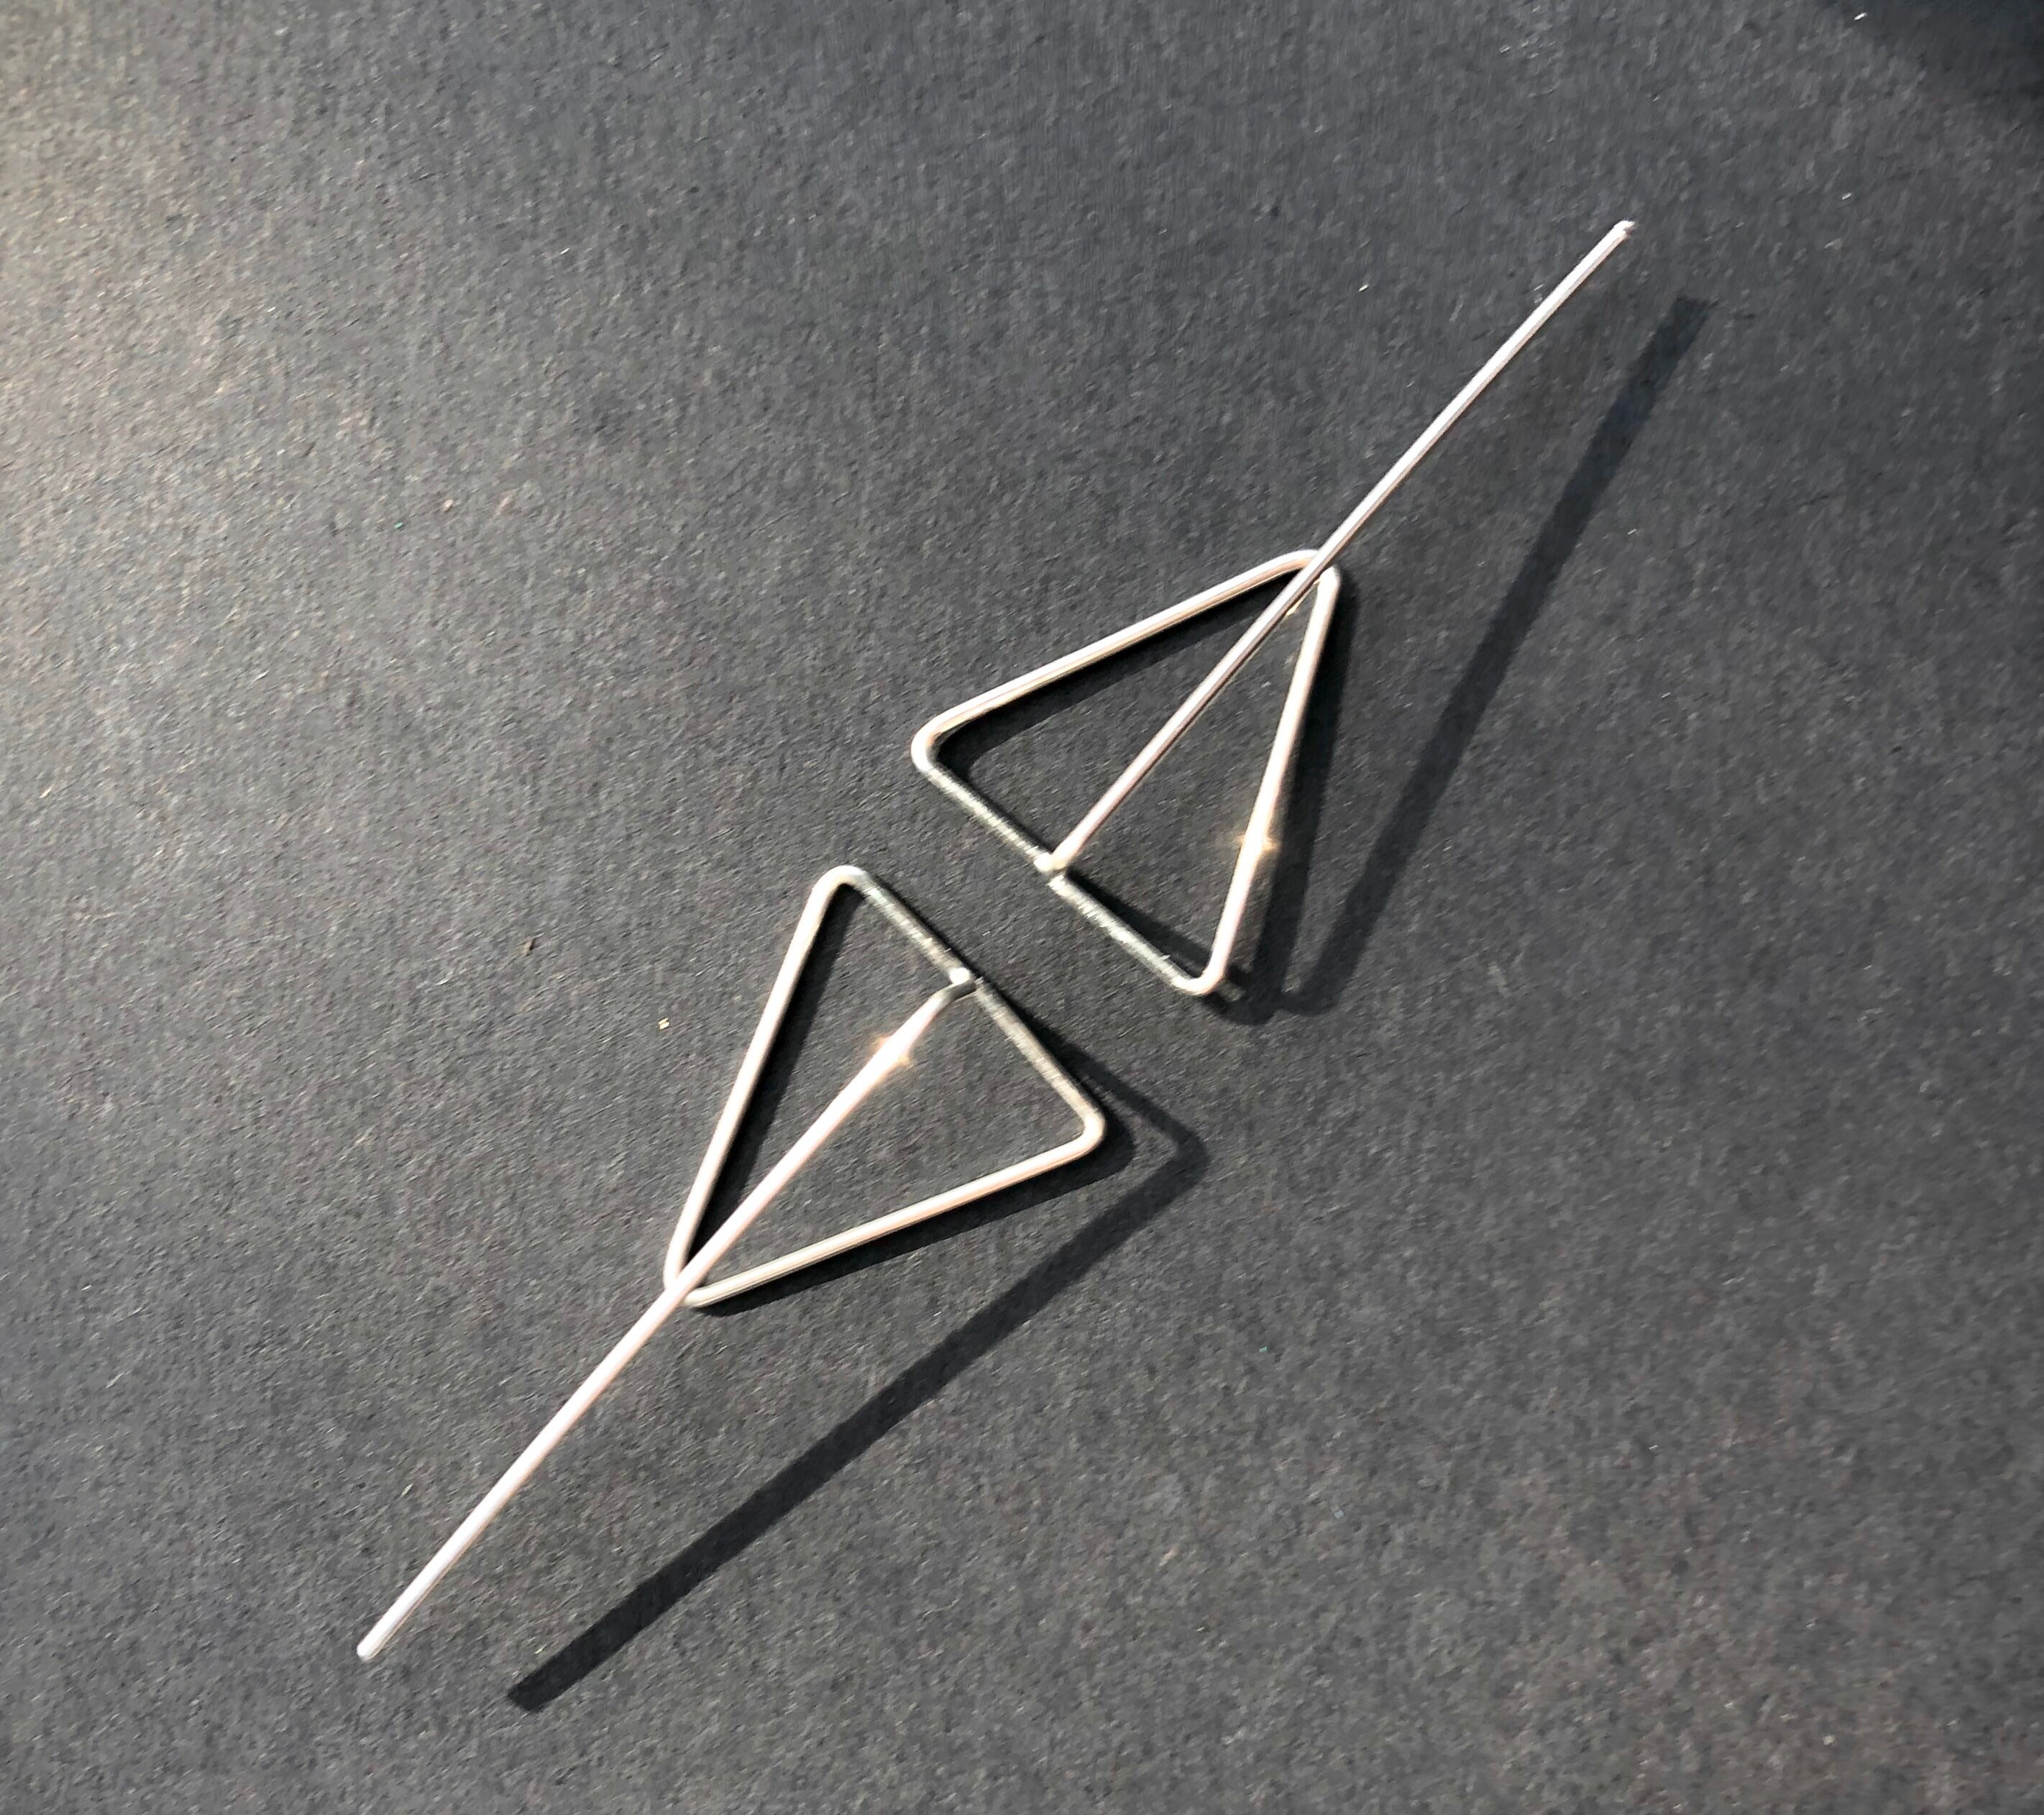 Jewelry trends 2021 Spring gift ideas. Minimalist geometric earrings gold filled and silver triangle shape in mixed metal earrings